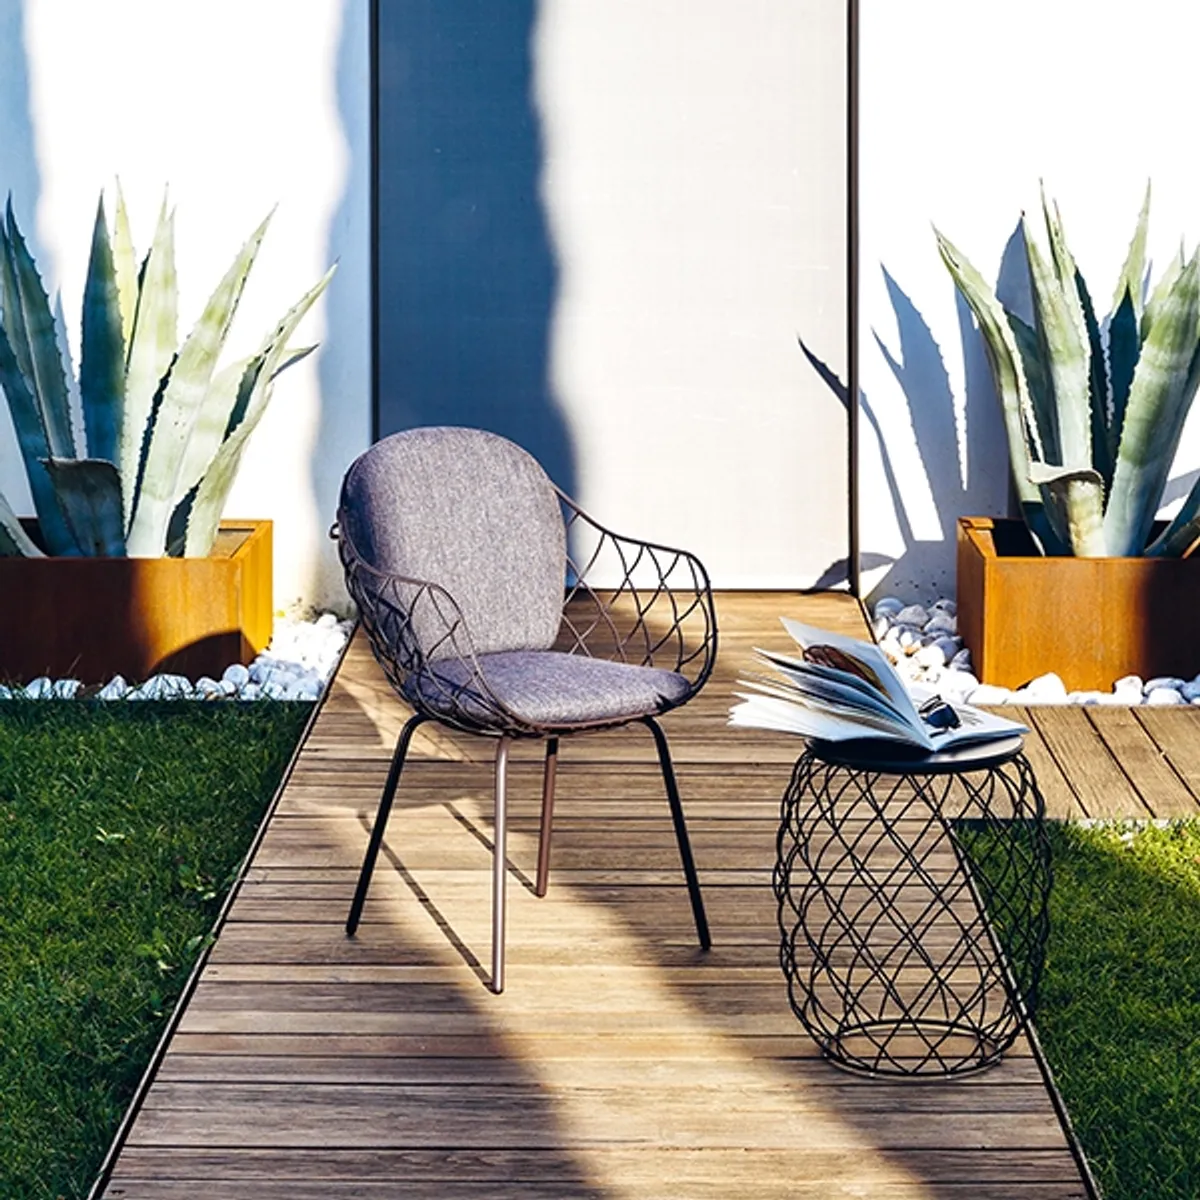 Web Pina Low Table Outdoors